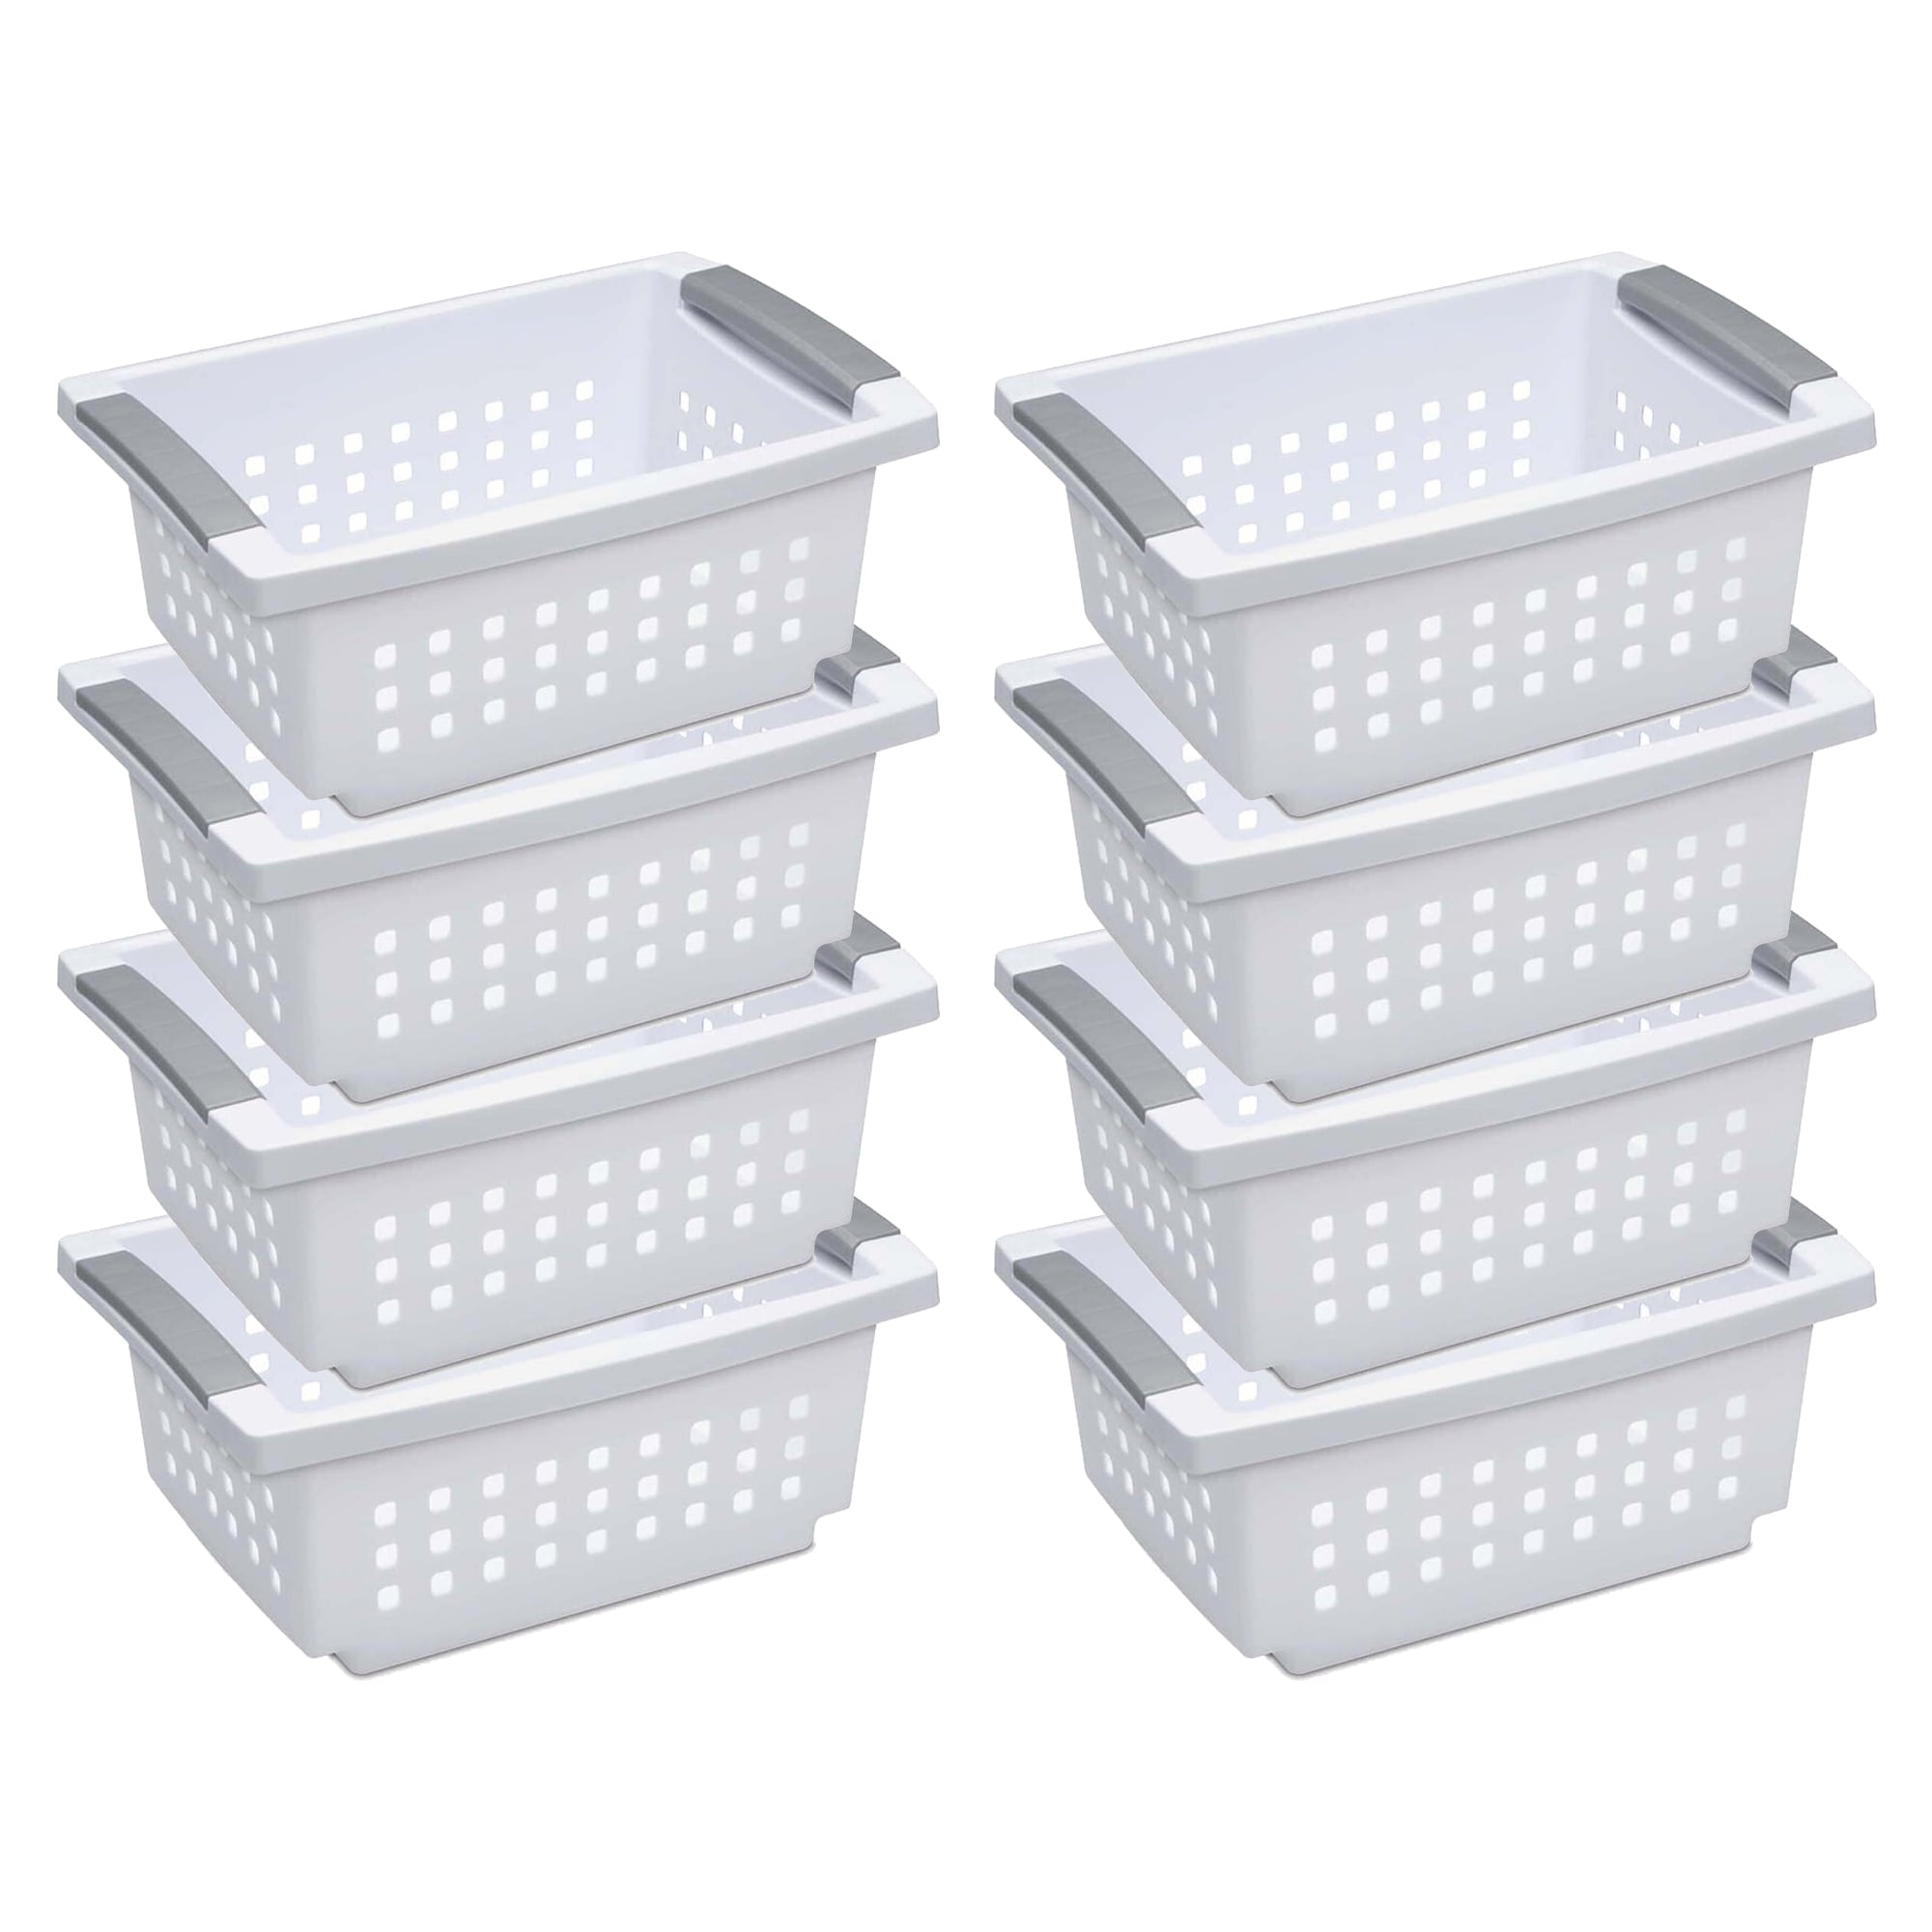 https://ak1.ostkcdn.com/images/products/is/images/direct/3e711be3cd80bbfa6768dd724782d2cfb4488209/Sterilite-Small-Stacking-Storage-Basket-with-Comfort-Grip-Handles%2C-White%2C-8-Pack.jpg